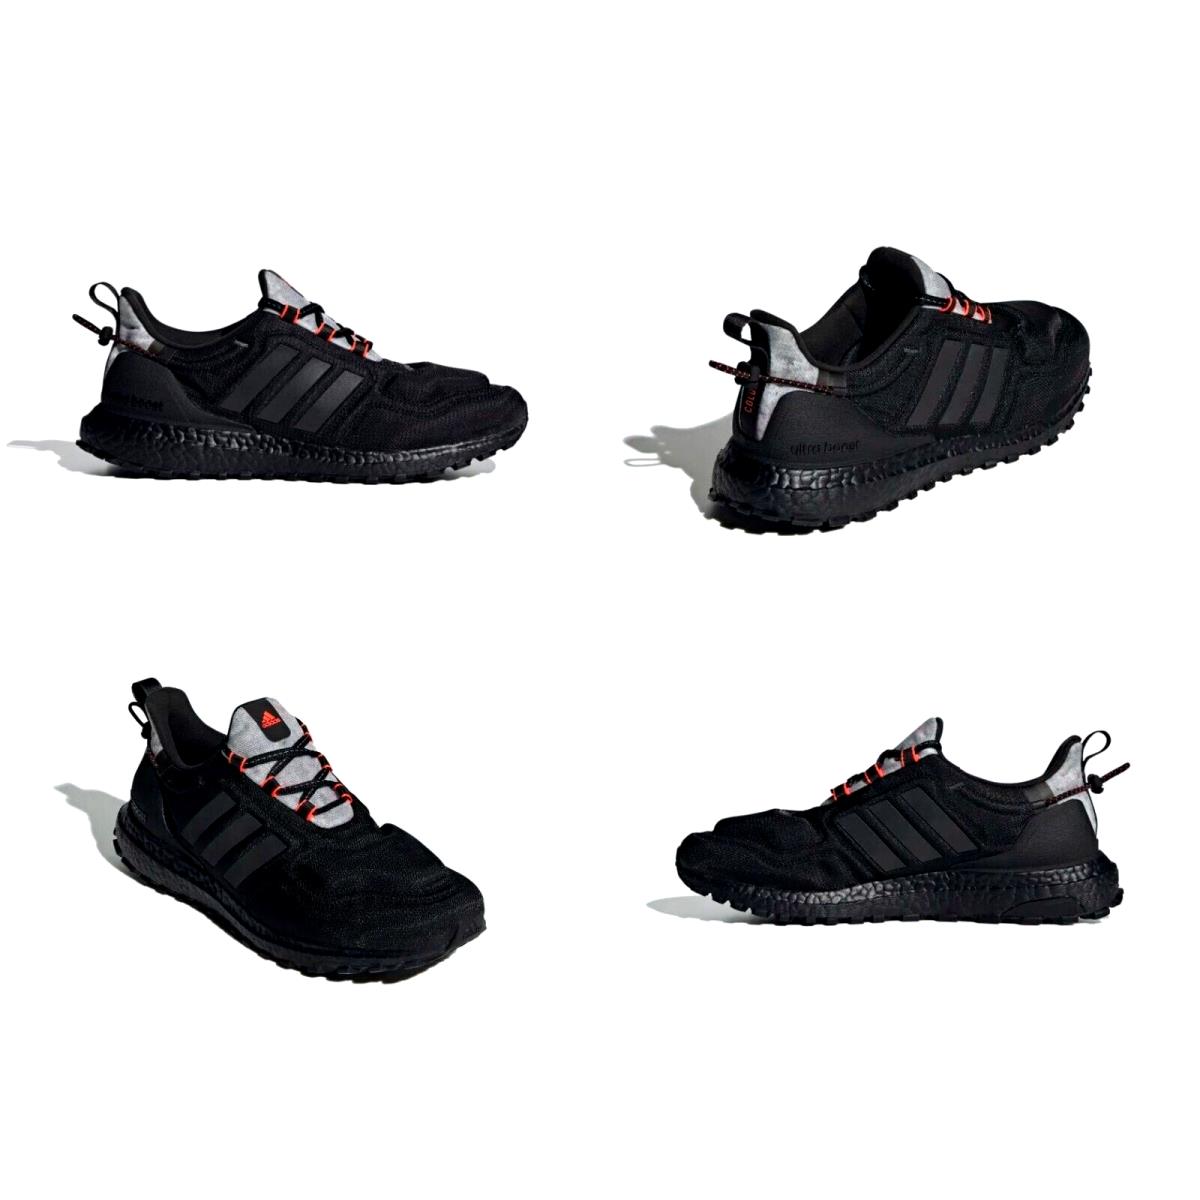 Adidas Ultraboost C.rdy Lab Black Red Running Shoes Men Size 10 US FZ3990